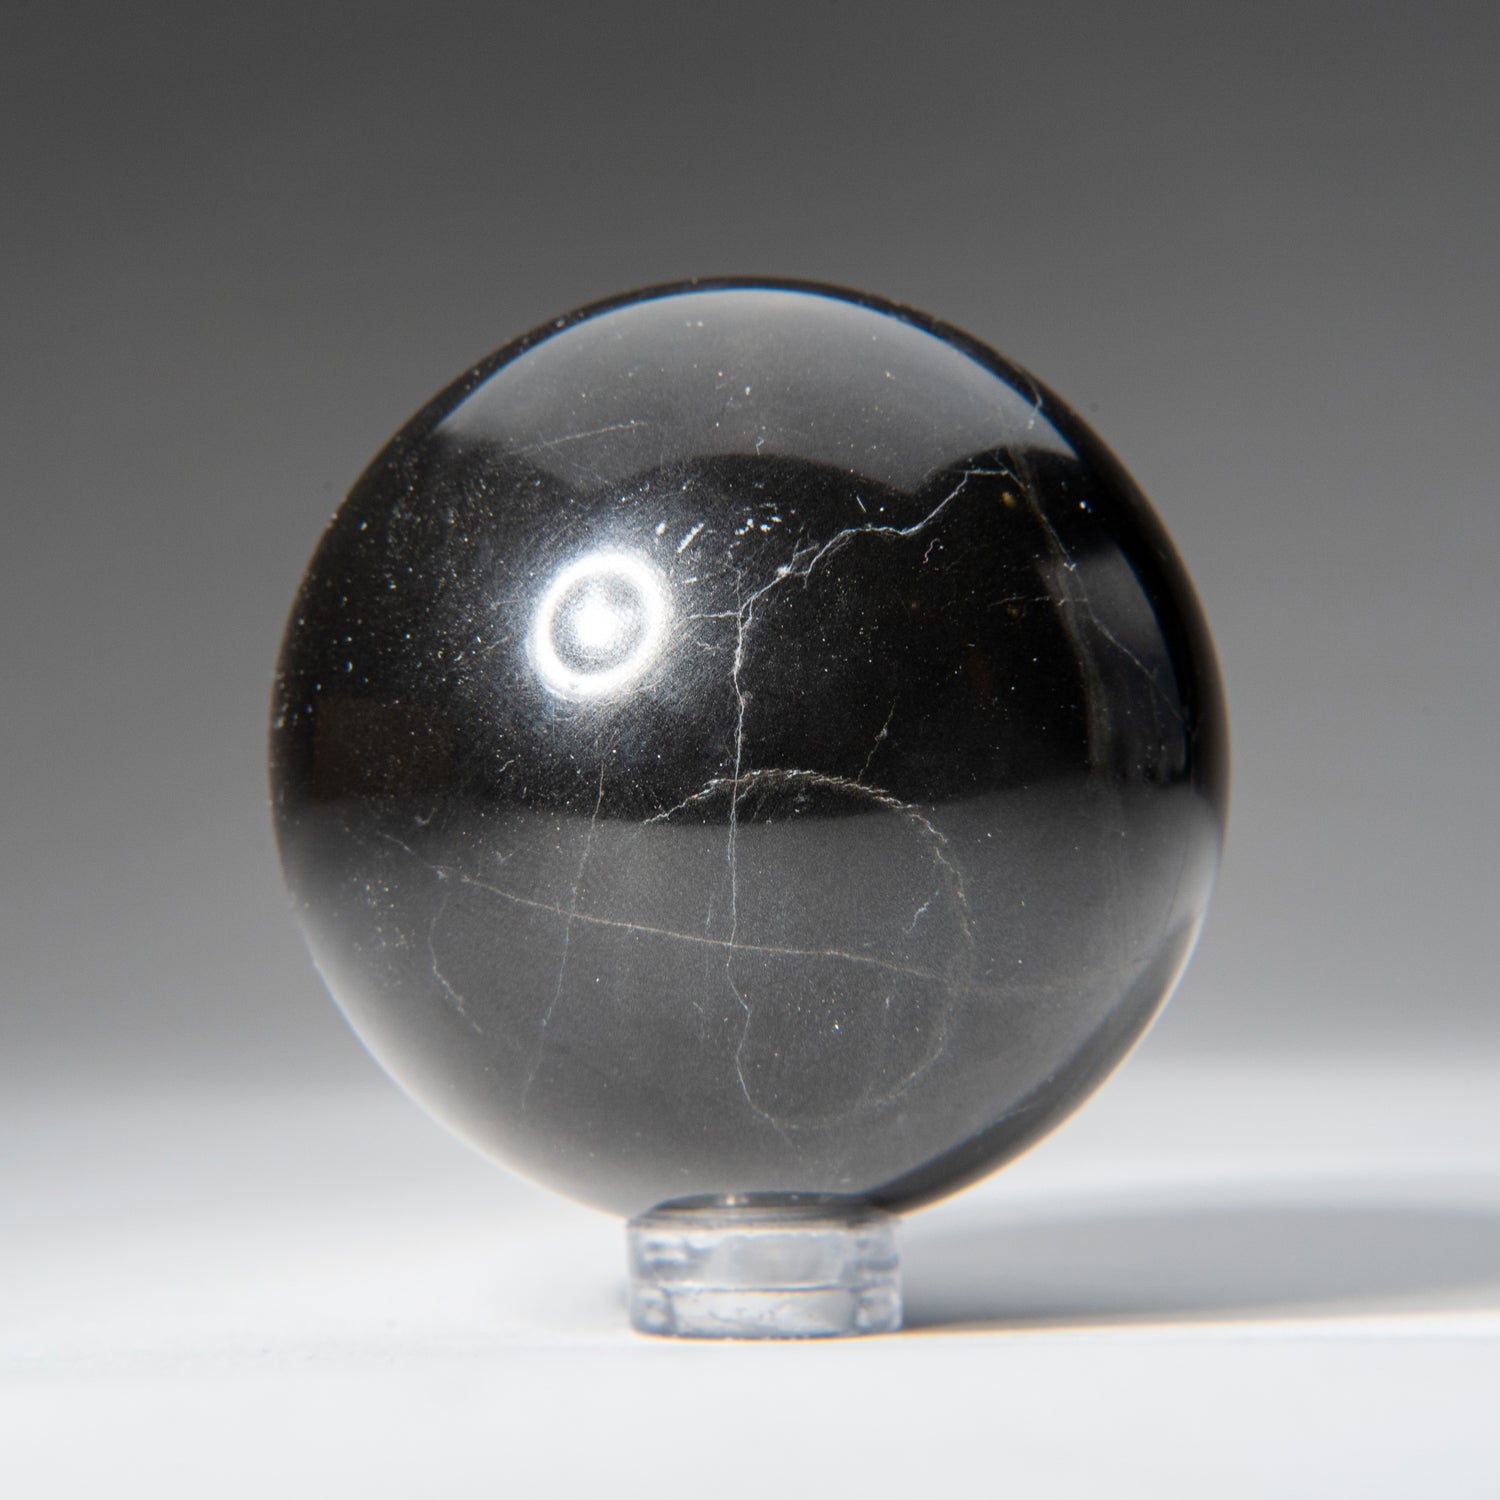 Genuine Polished Black Agate Sphere (2") with Acrylic Display Stand